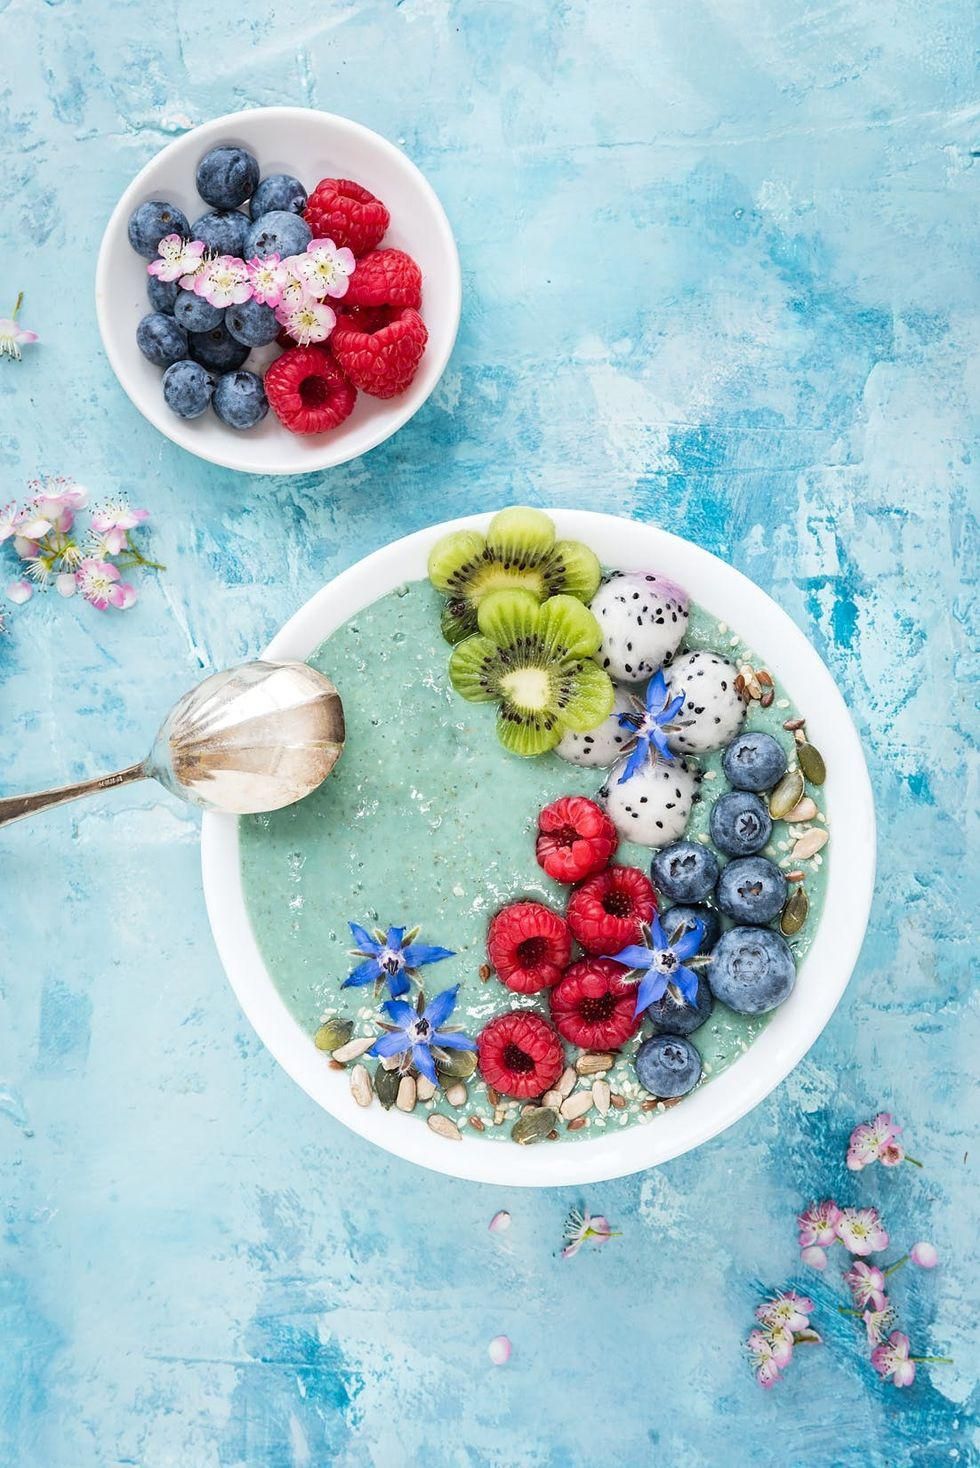 aqua colored mermaid smoothie bowl with berries, nuts, and flowers